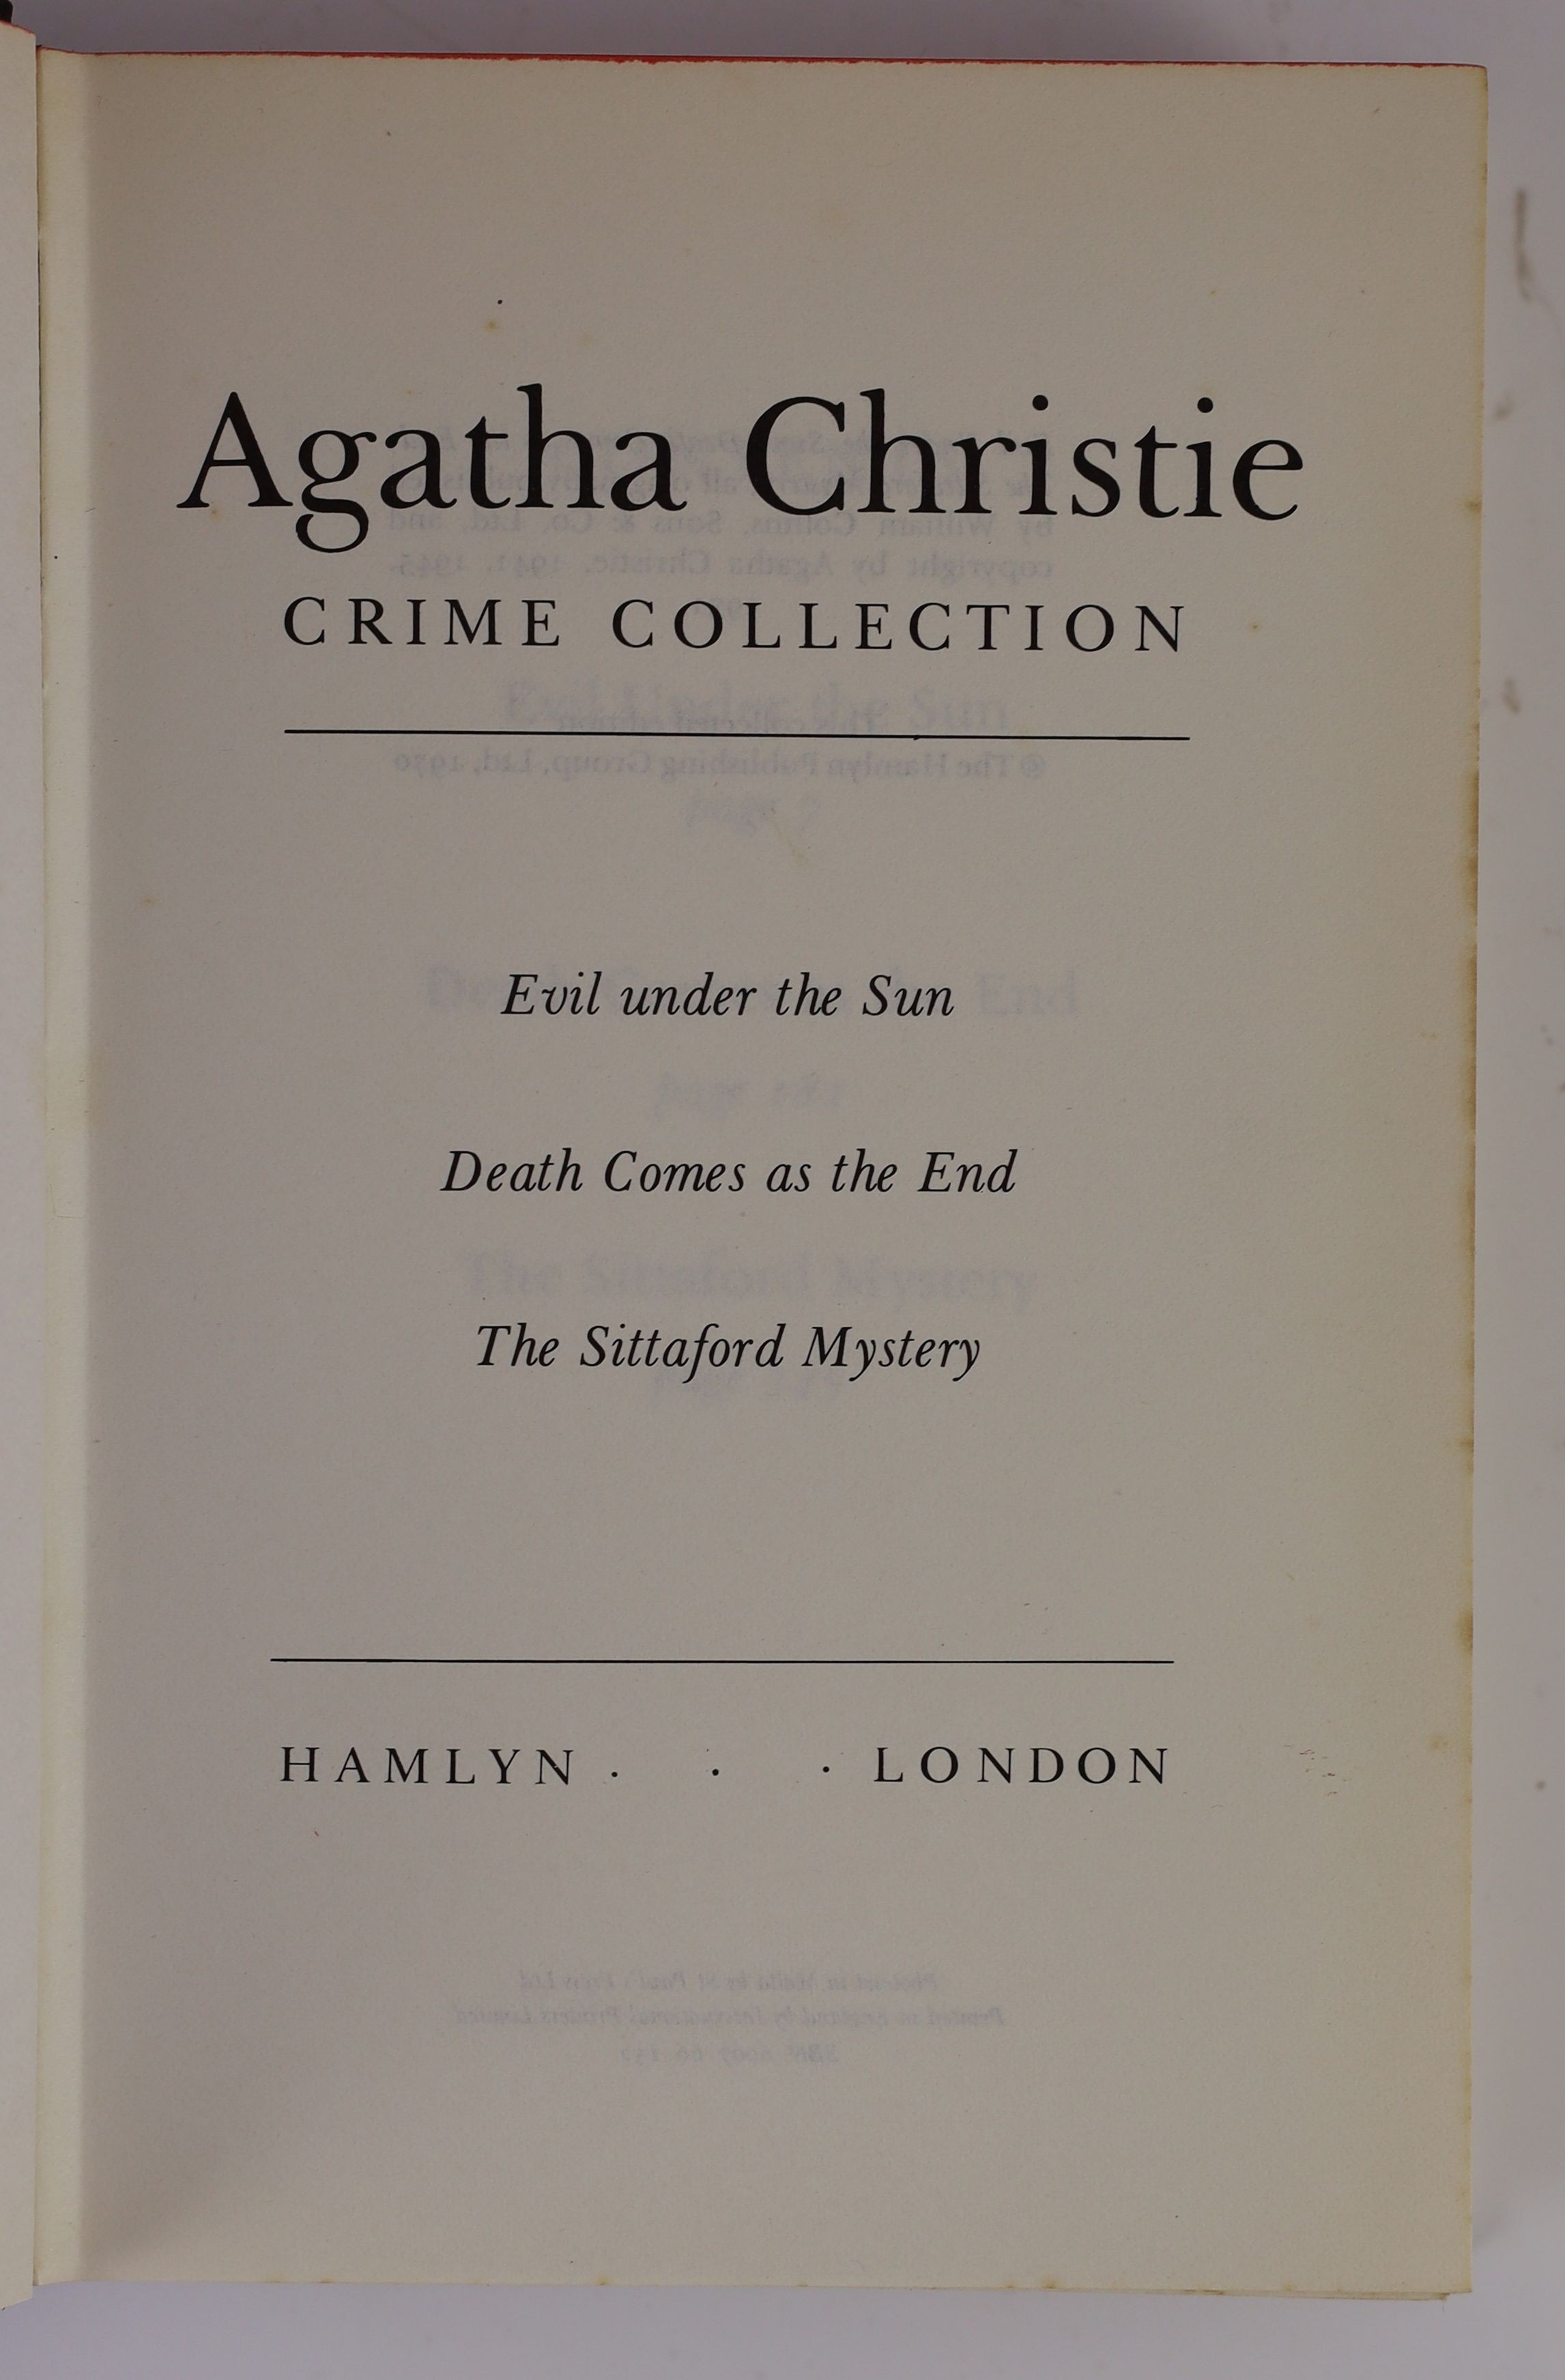 Christie, Agatha - Crime Collection: Evil Under The Sun / Death Comes As The End / The Sittaford Mystery, 1970